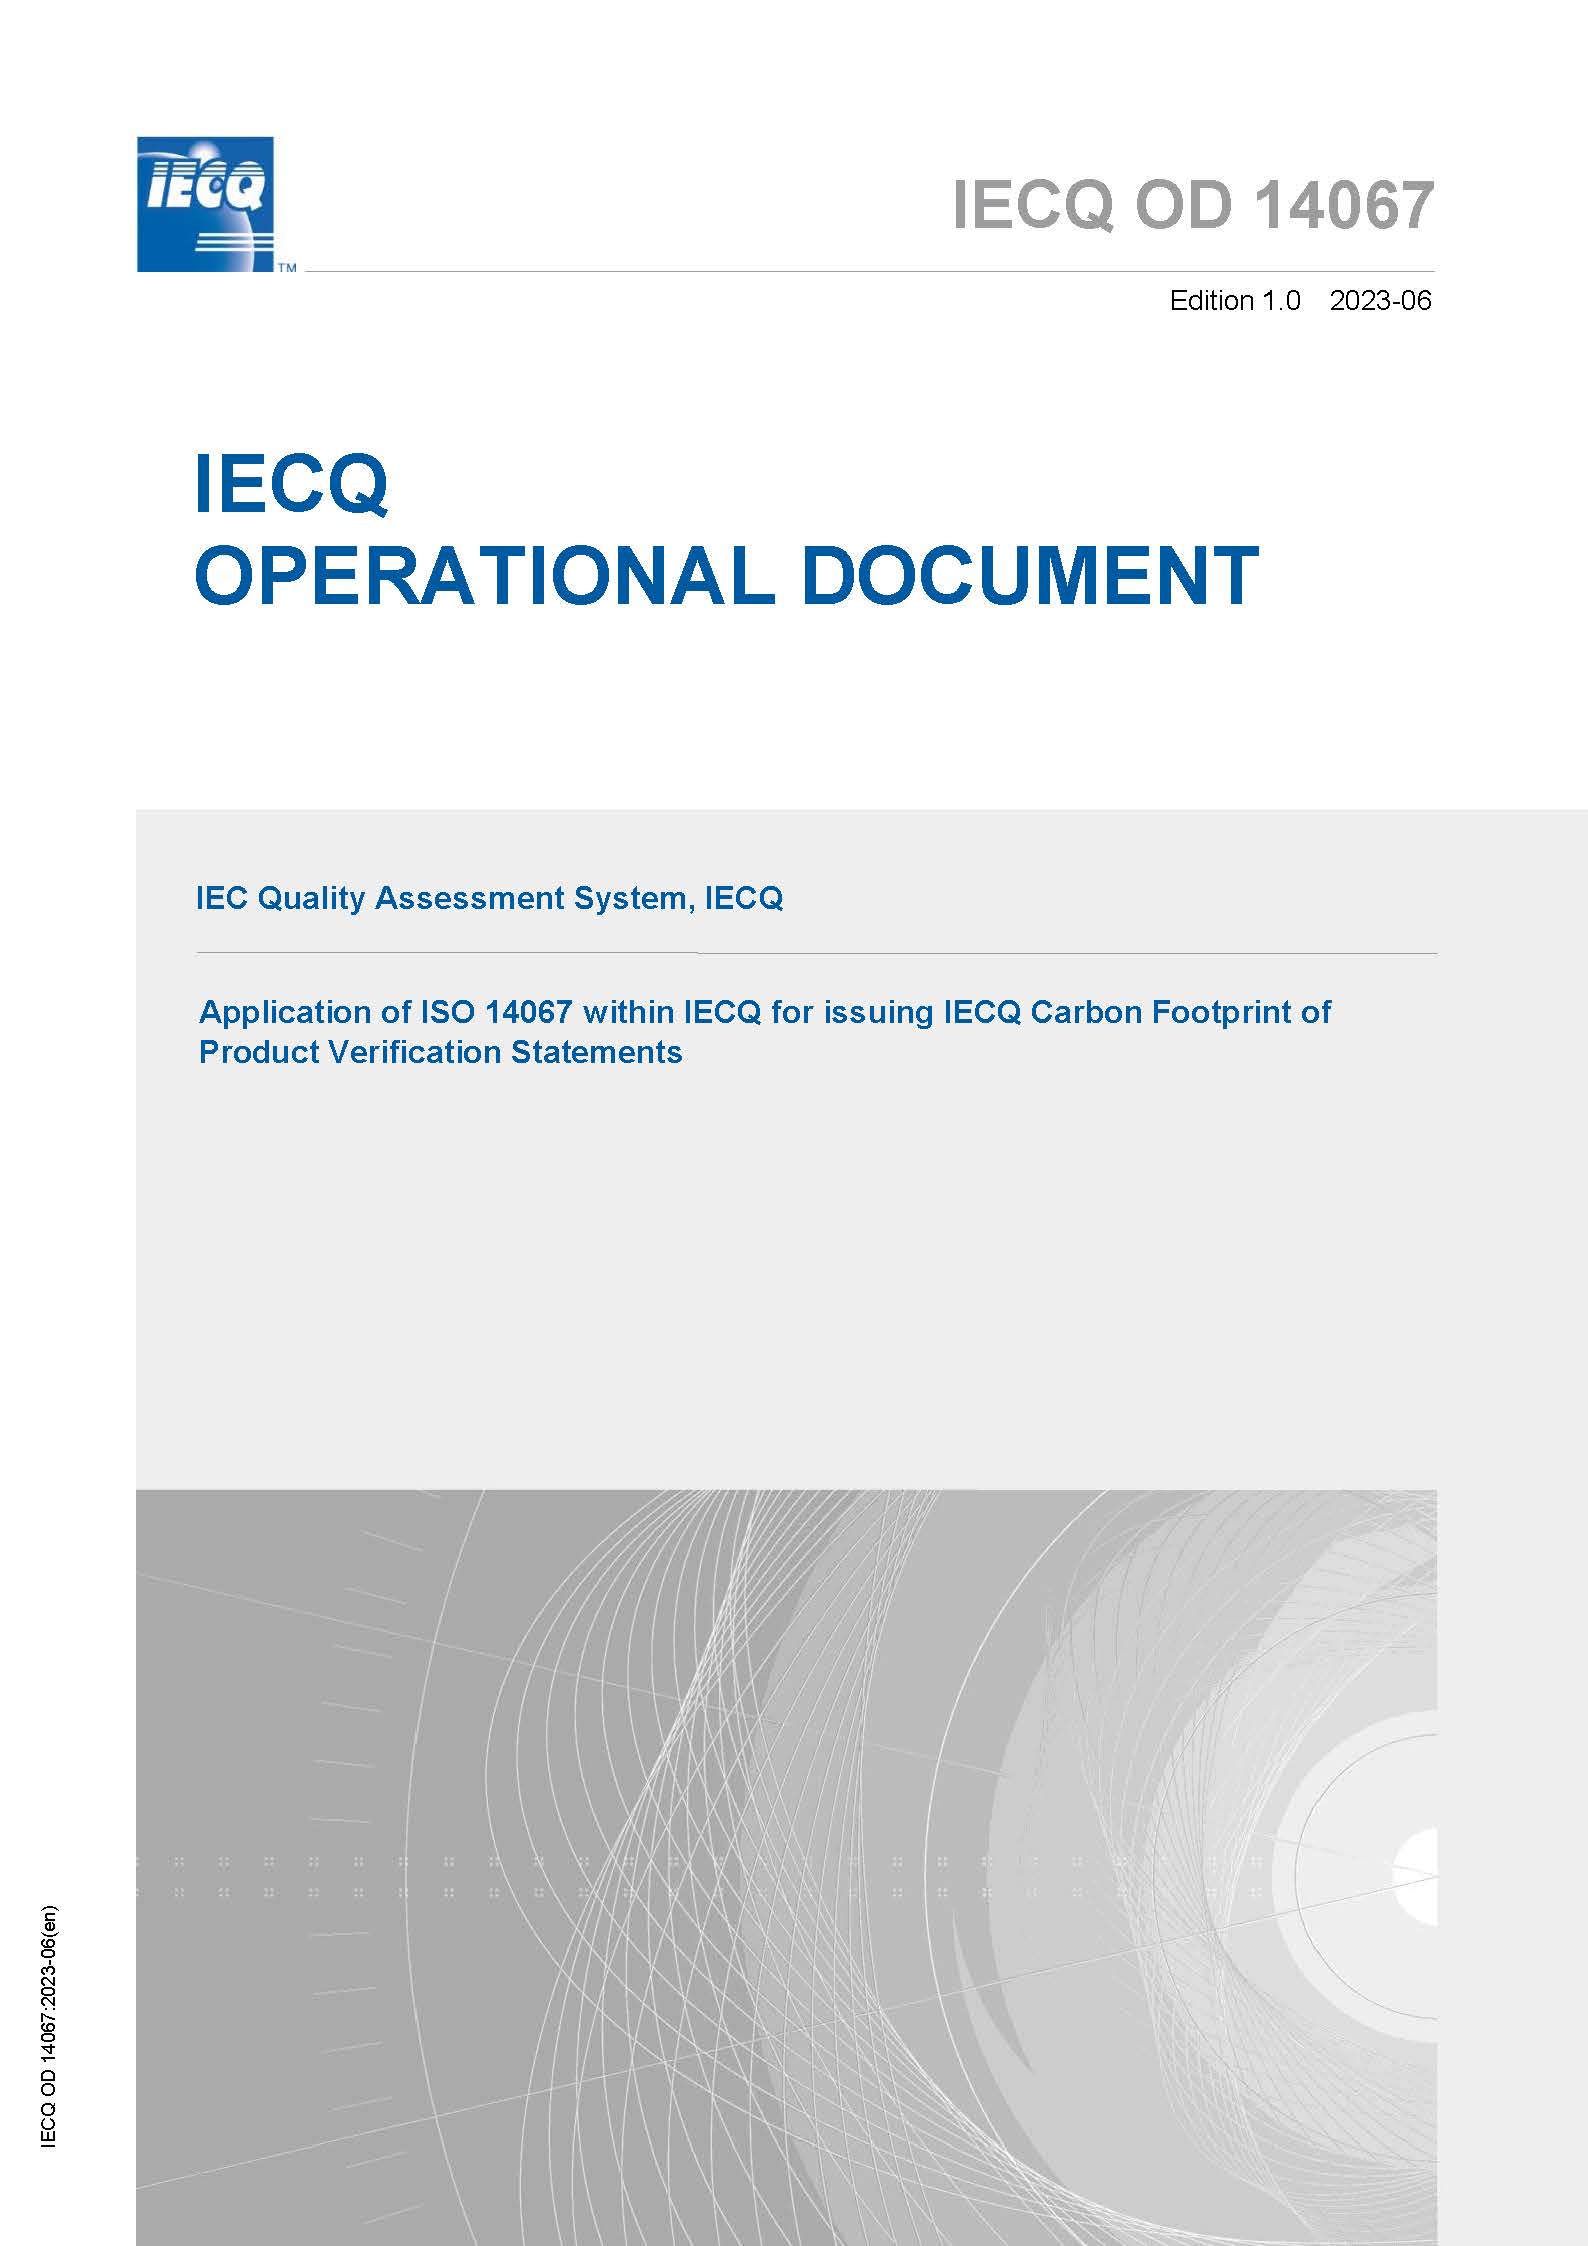 IECQ Rules of Procedure - Part 3: IECQ Approved Component Products, Related Materials & Assemblies Scheme